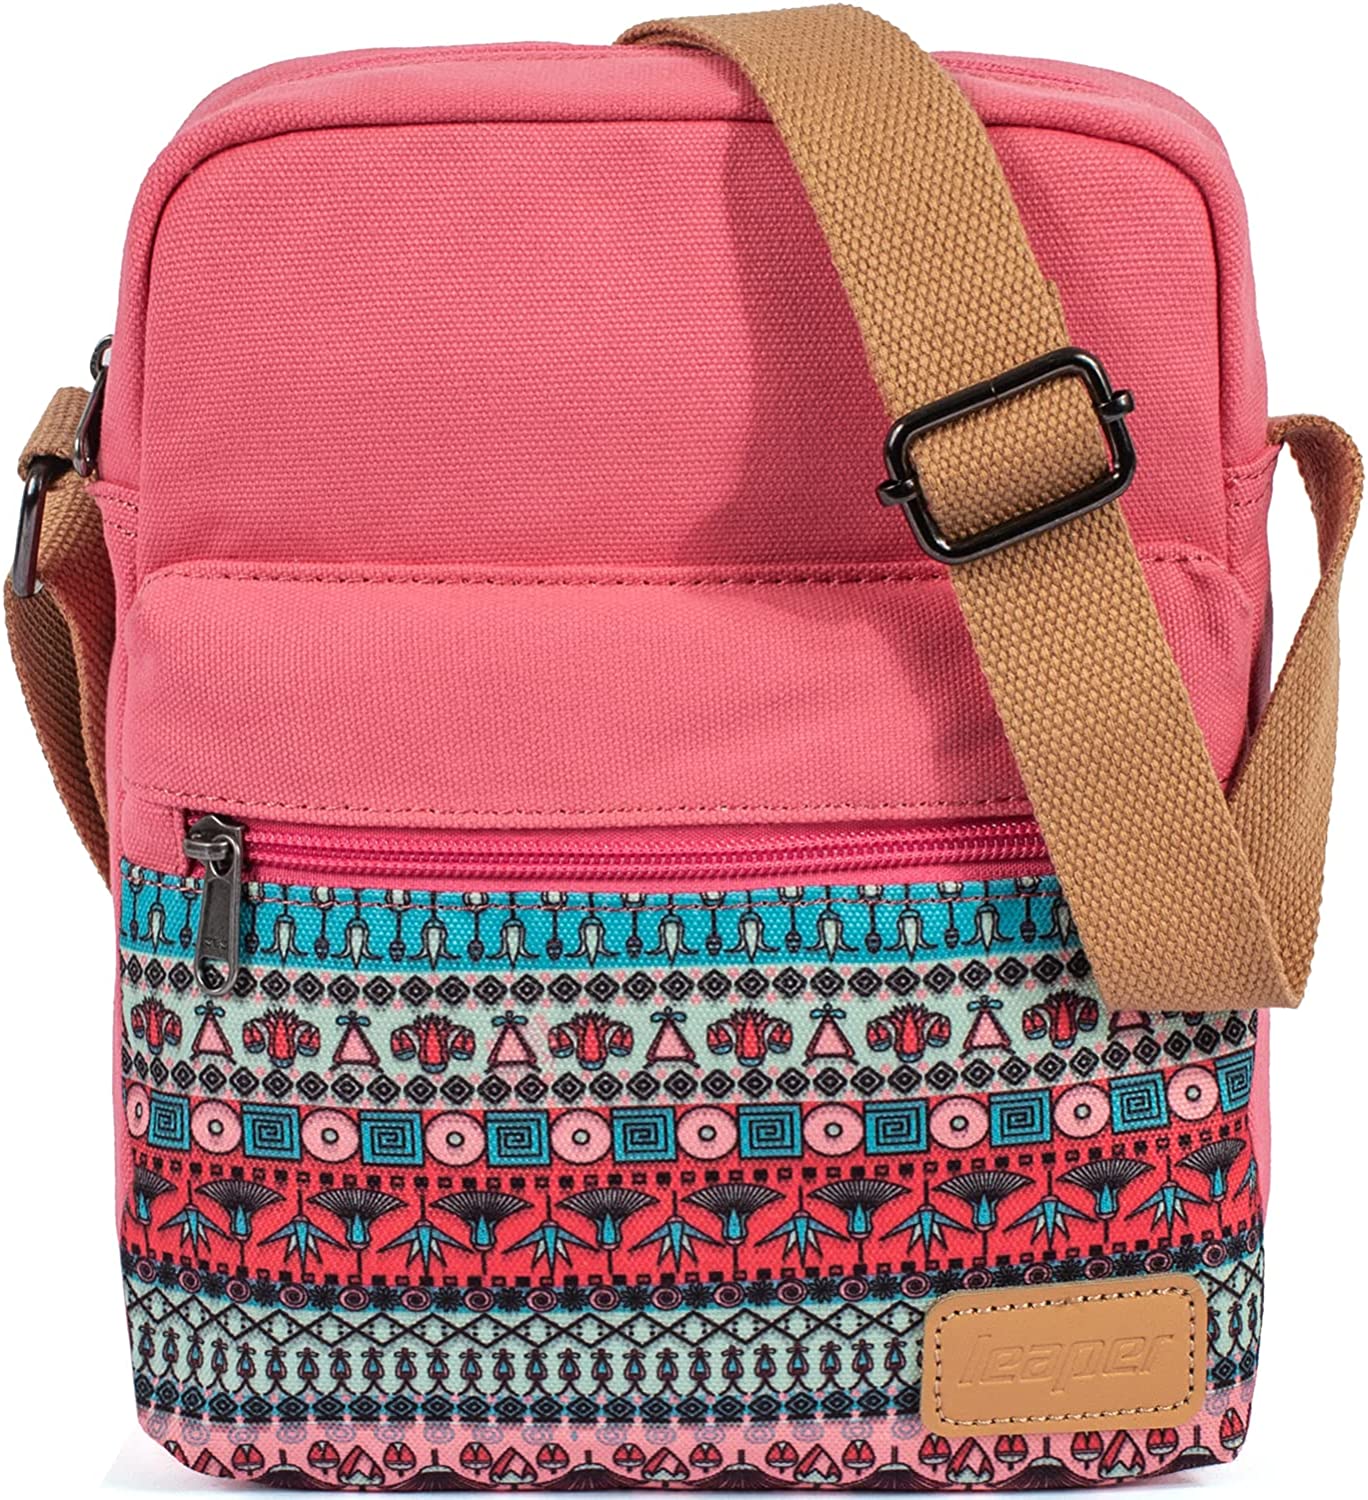 Leaper Small Canvas Crossbody Bag and Purse Set for Girls and Women 